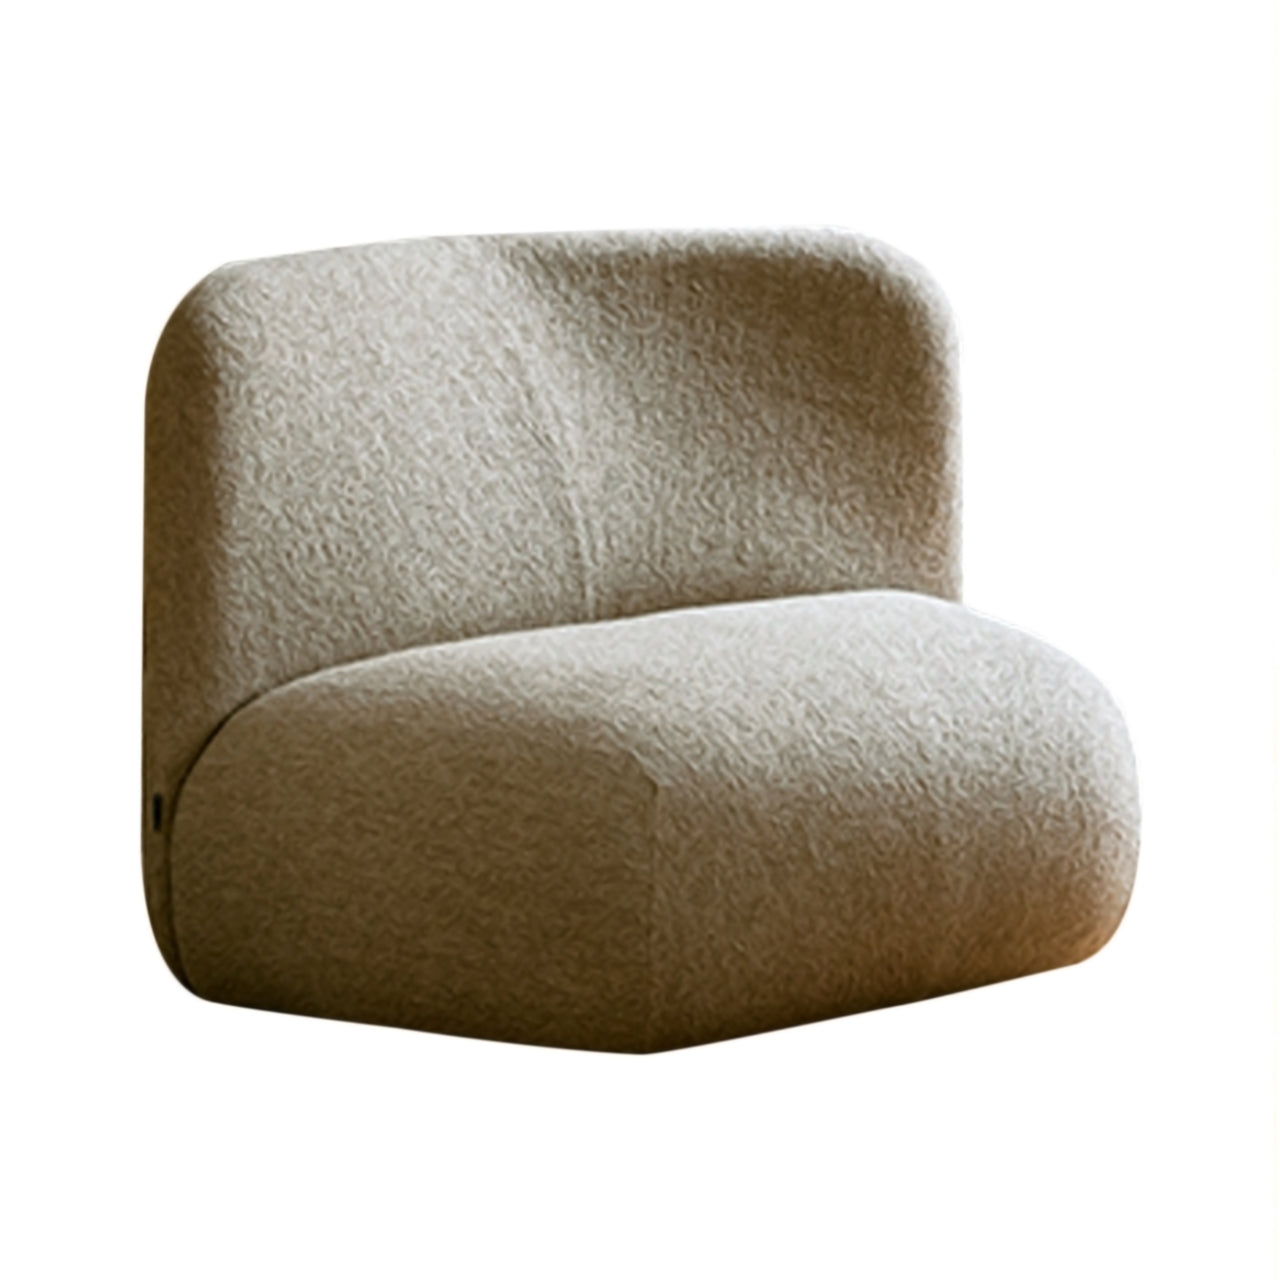 Botera Armchair: Without Cover